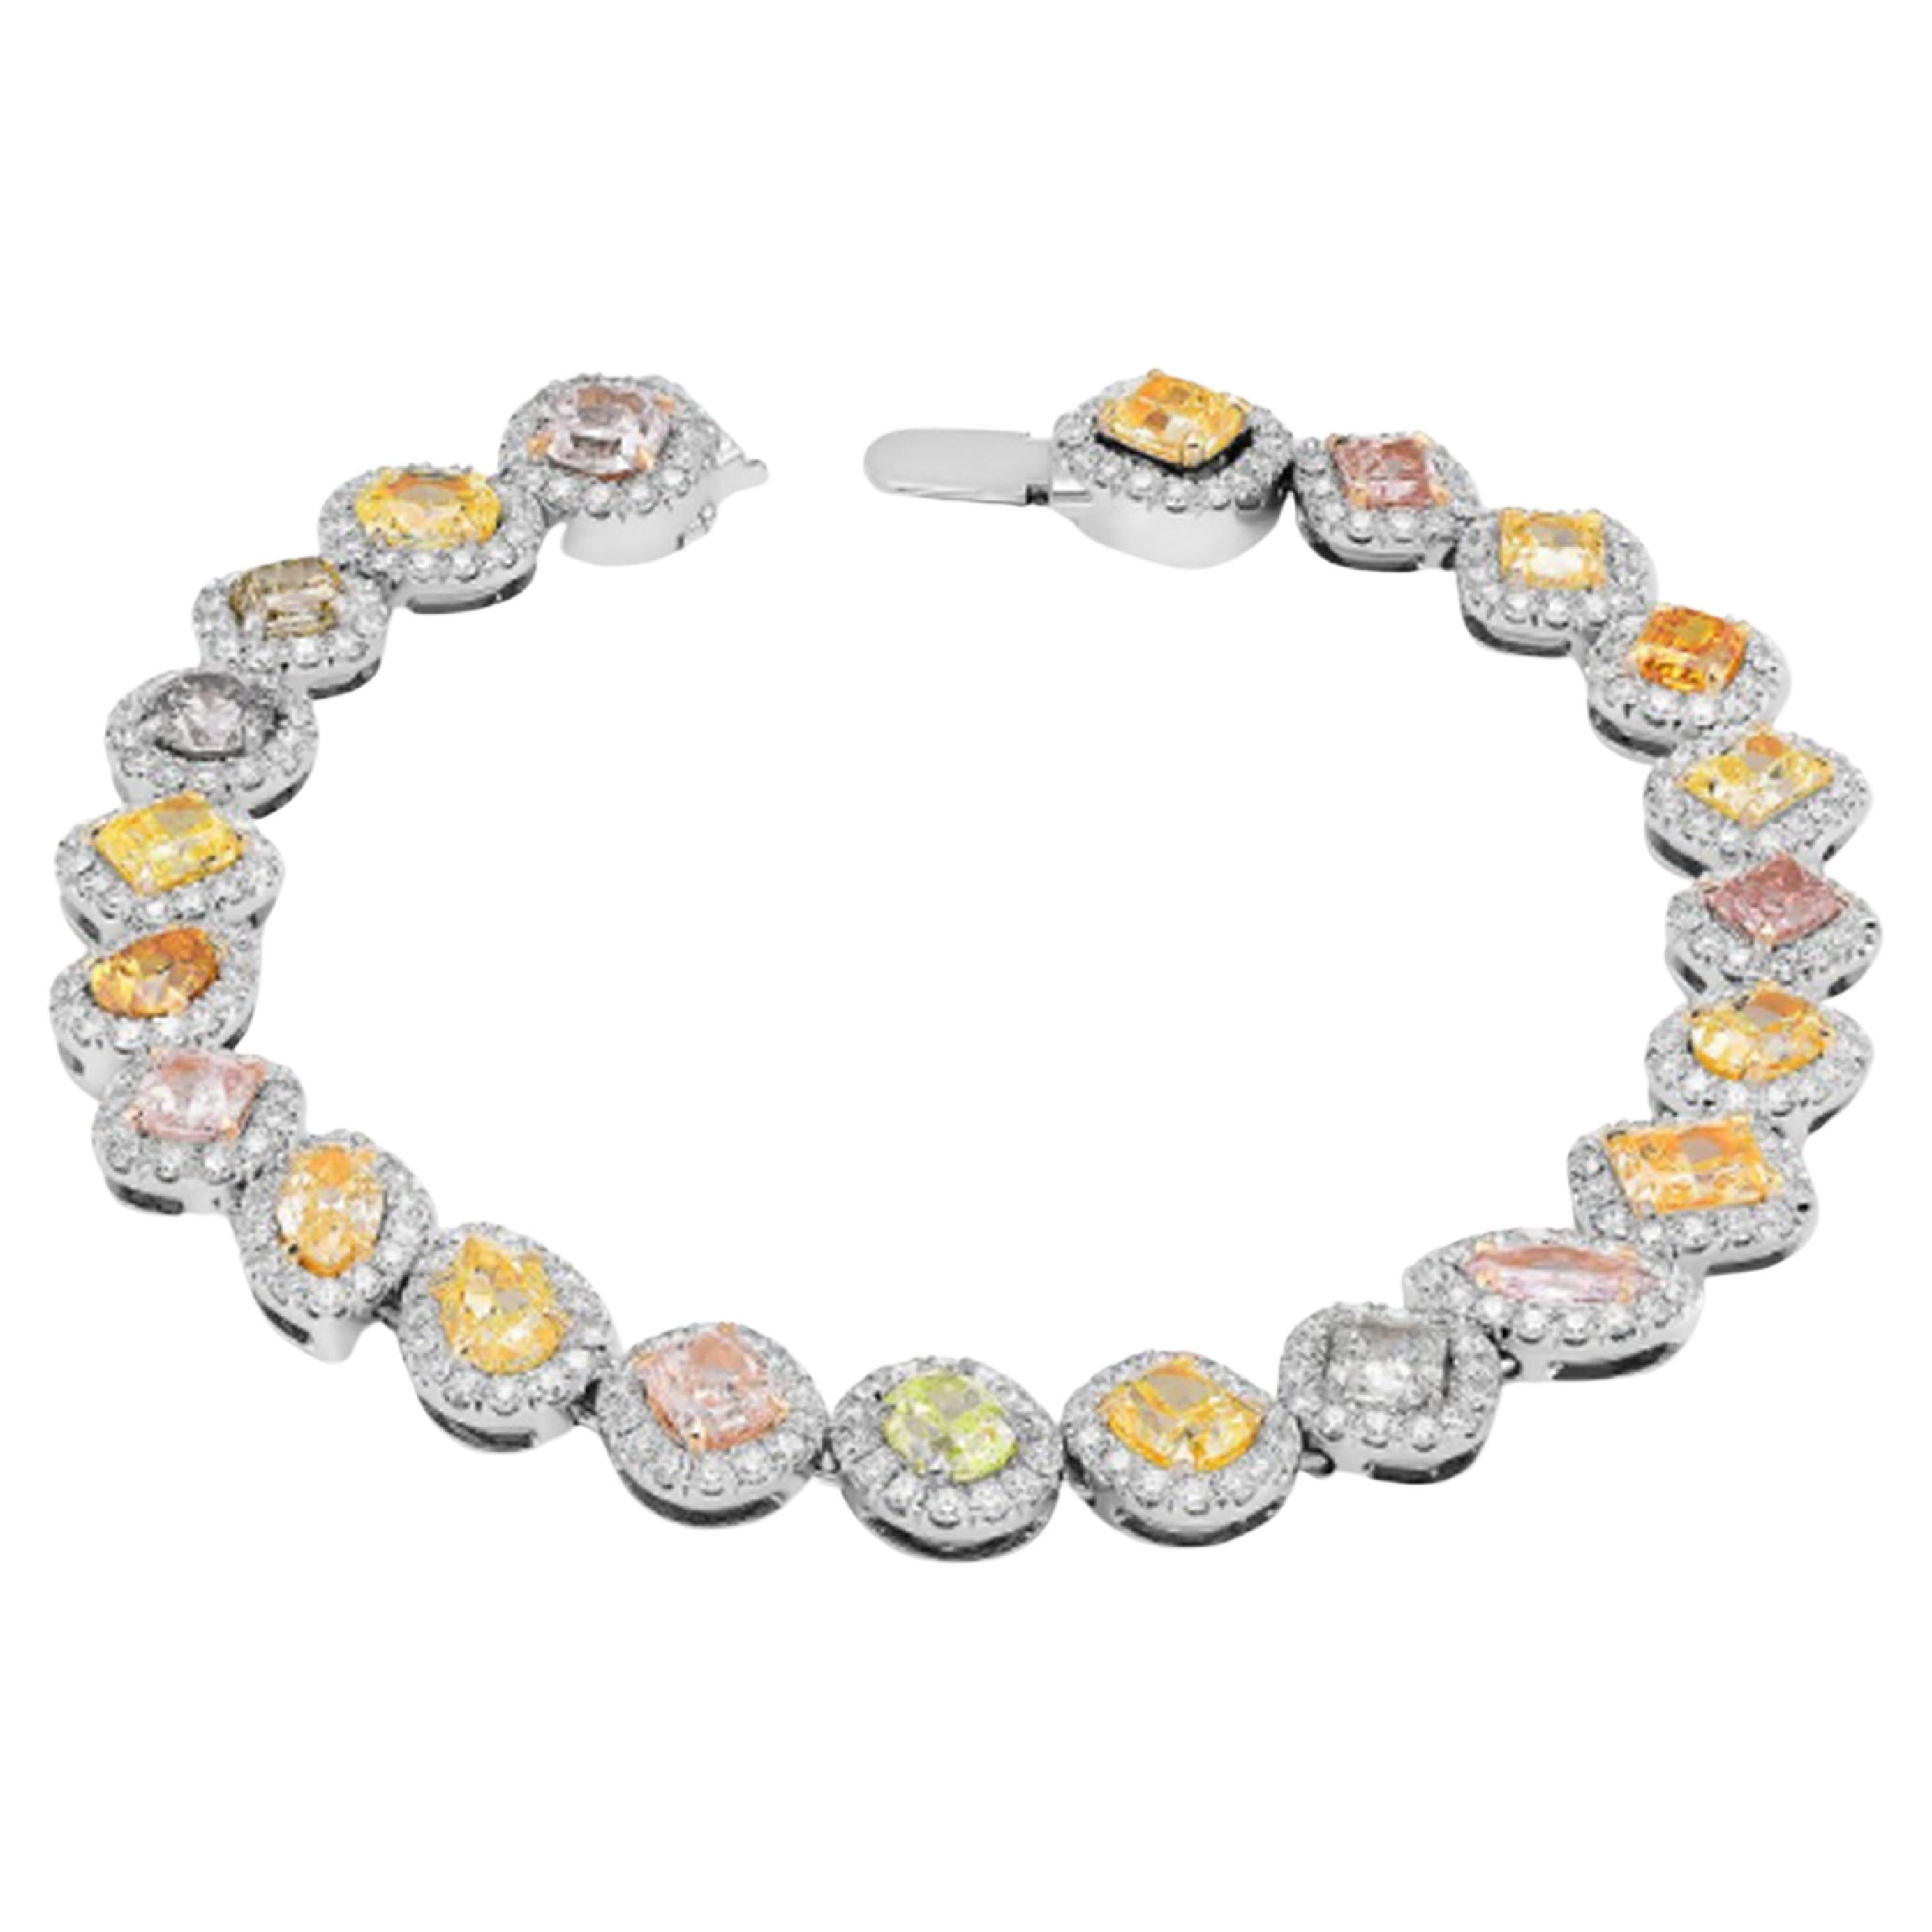 GIA Certified 11.46CTTW Multicolored & Mixed shape Diamond Bracelet  For Sale